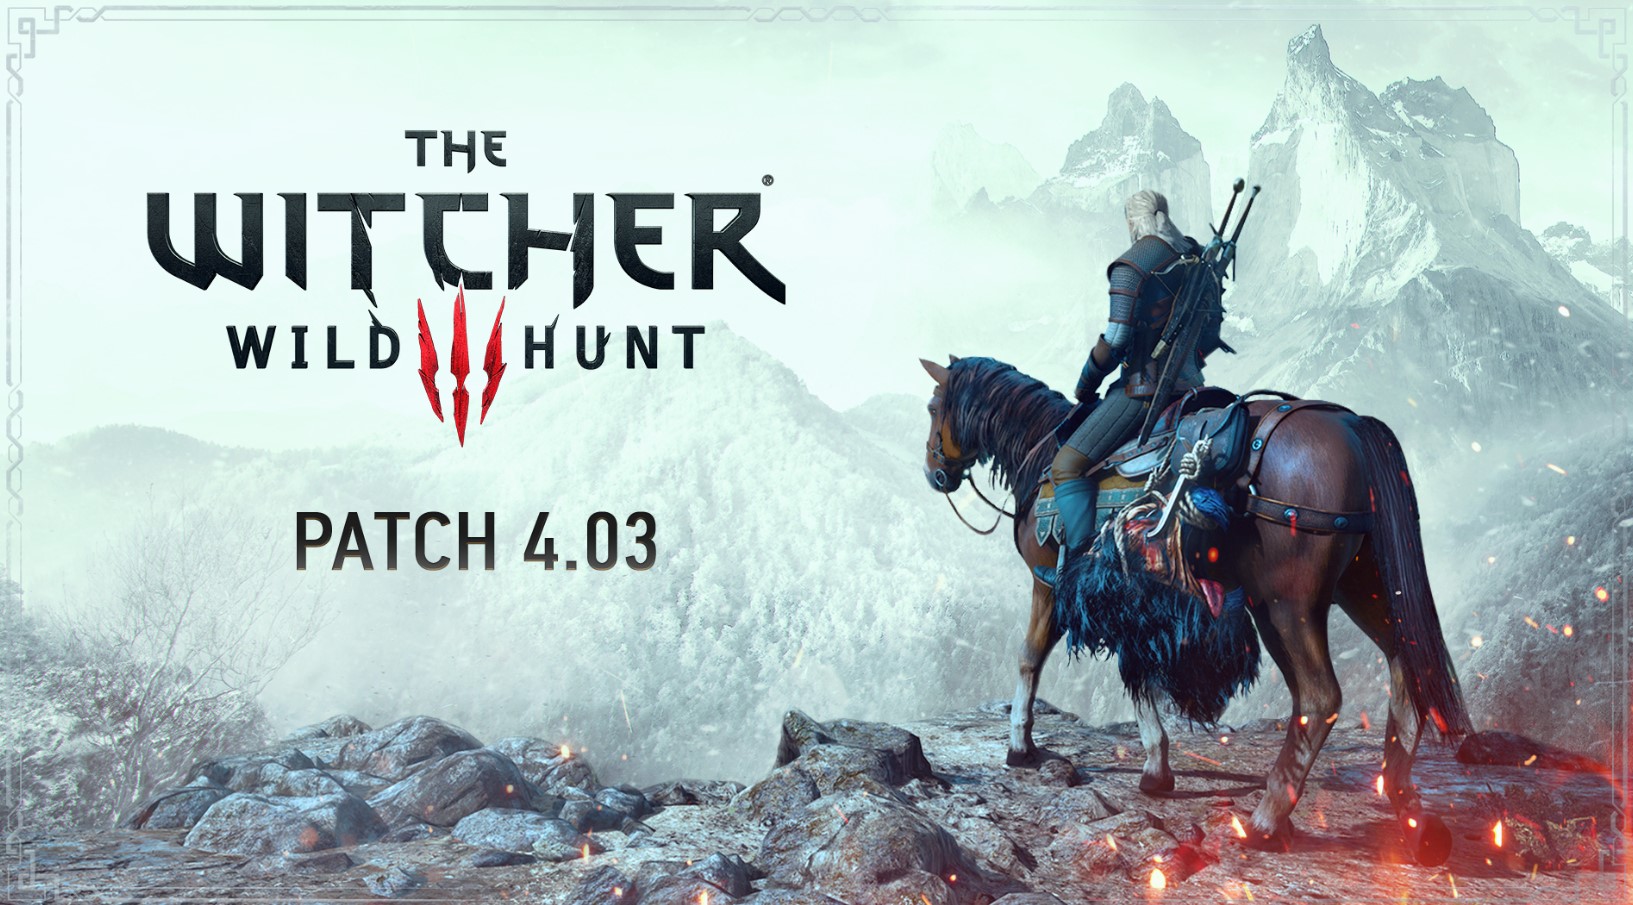 The Witcher 3: Wild Hunt Patch 4.03